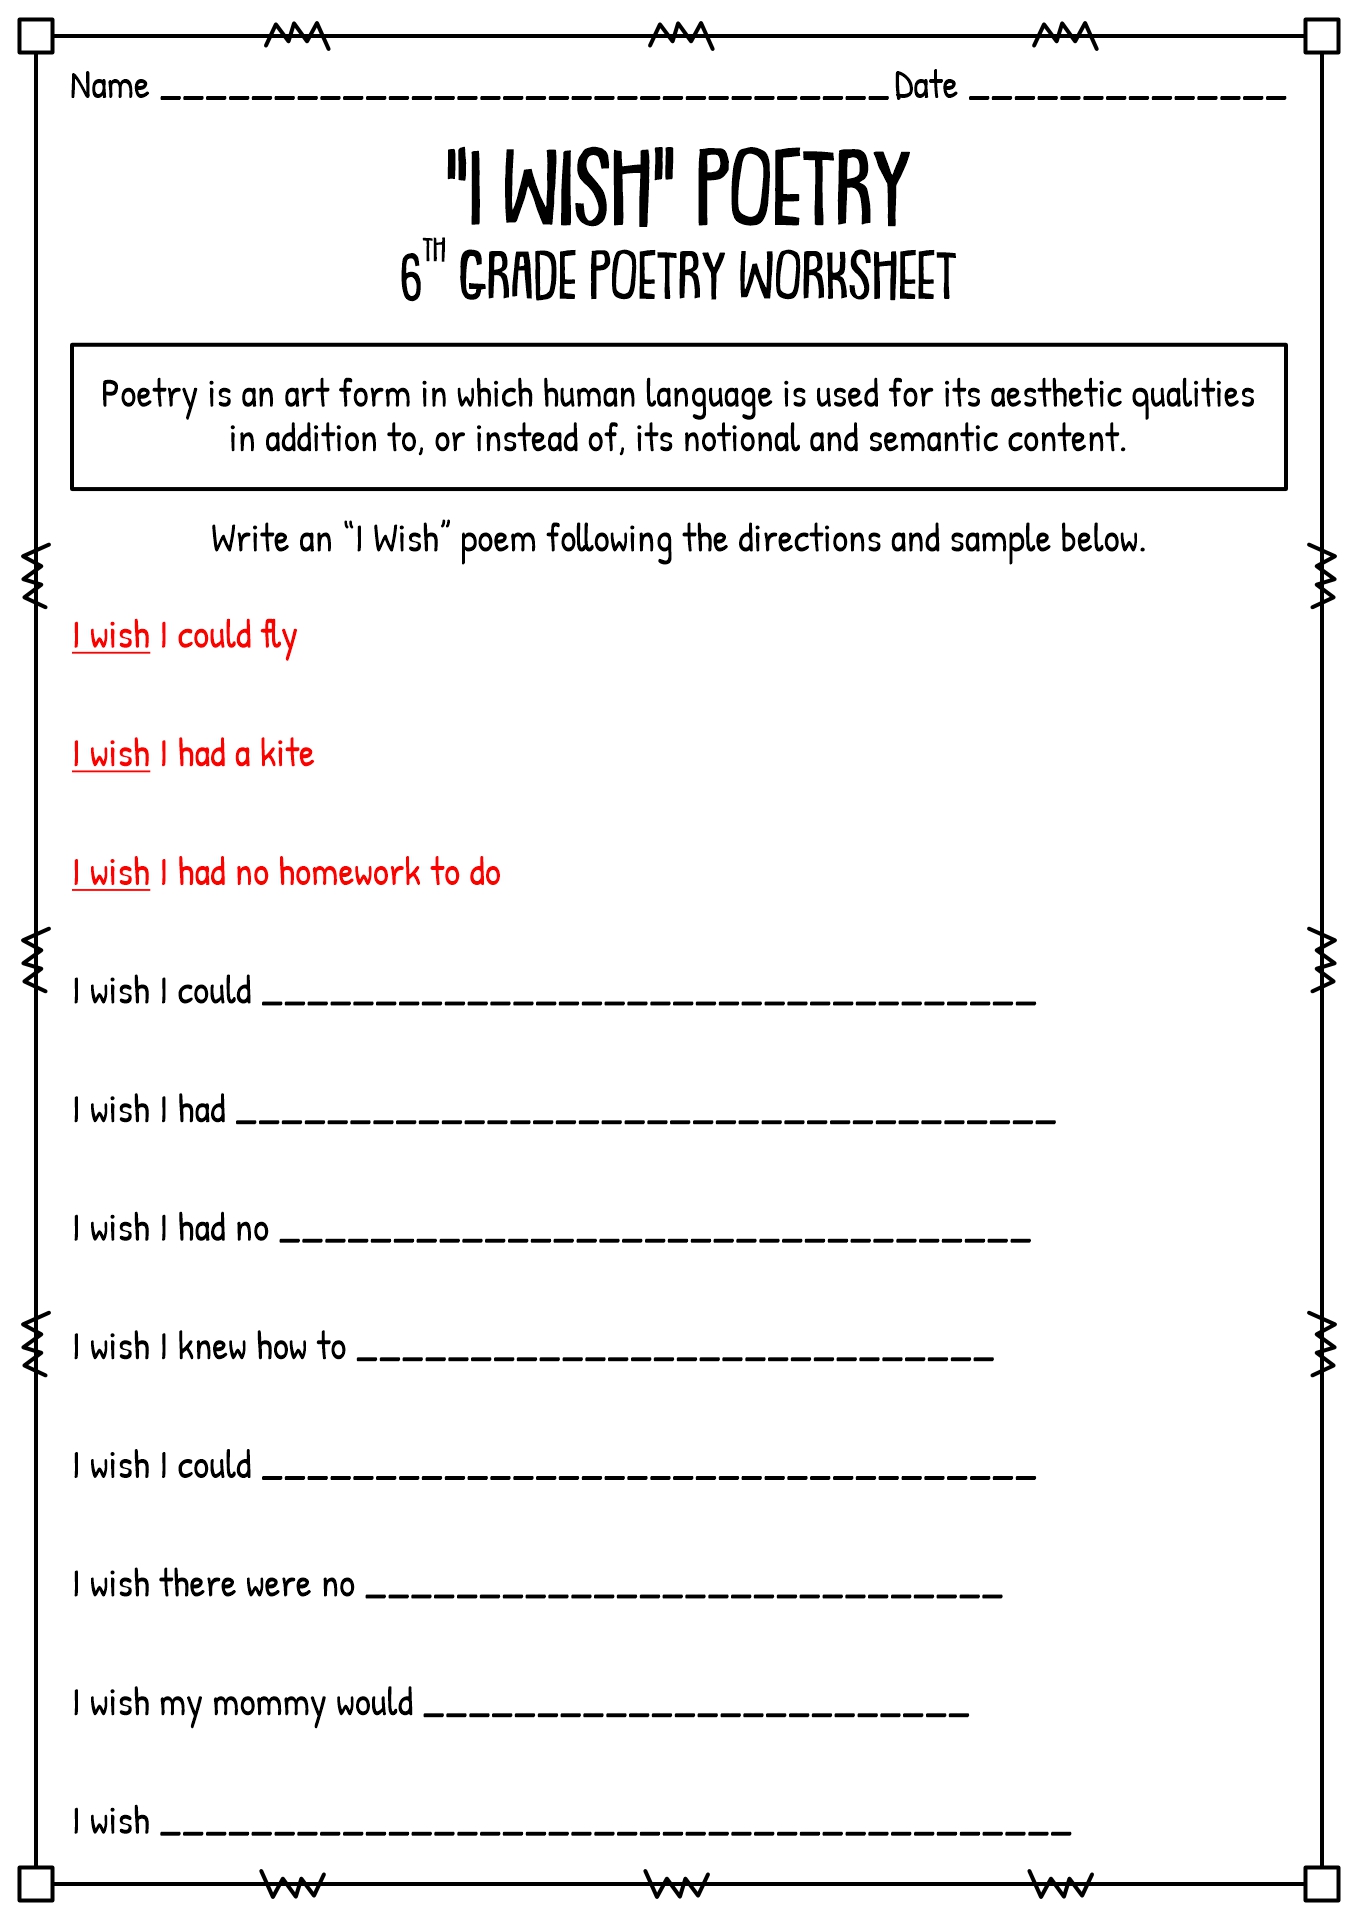 19-best-images-of-poetry-terms-5th-grade-worksheets-high-school